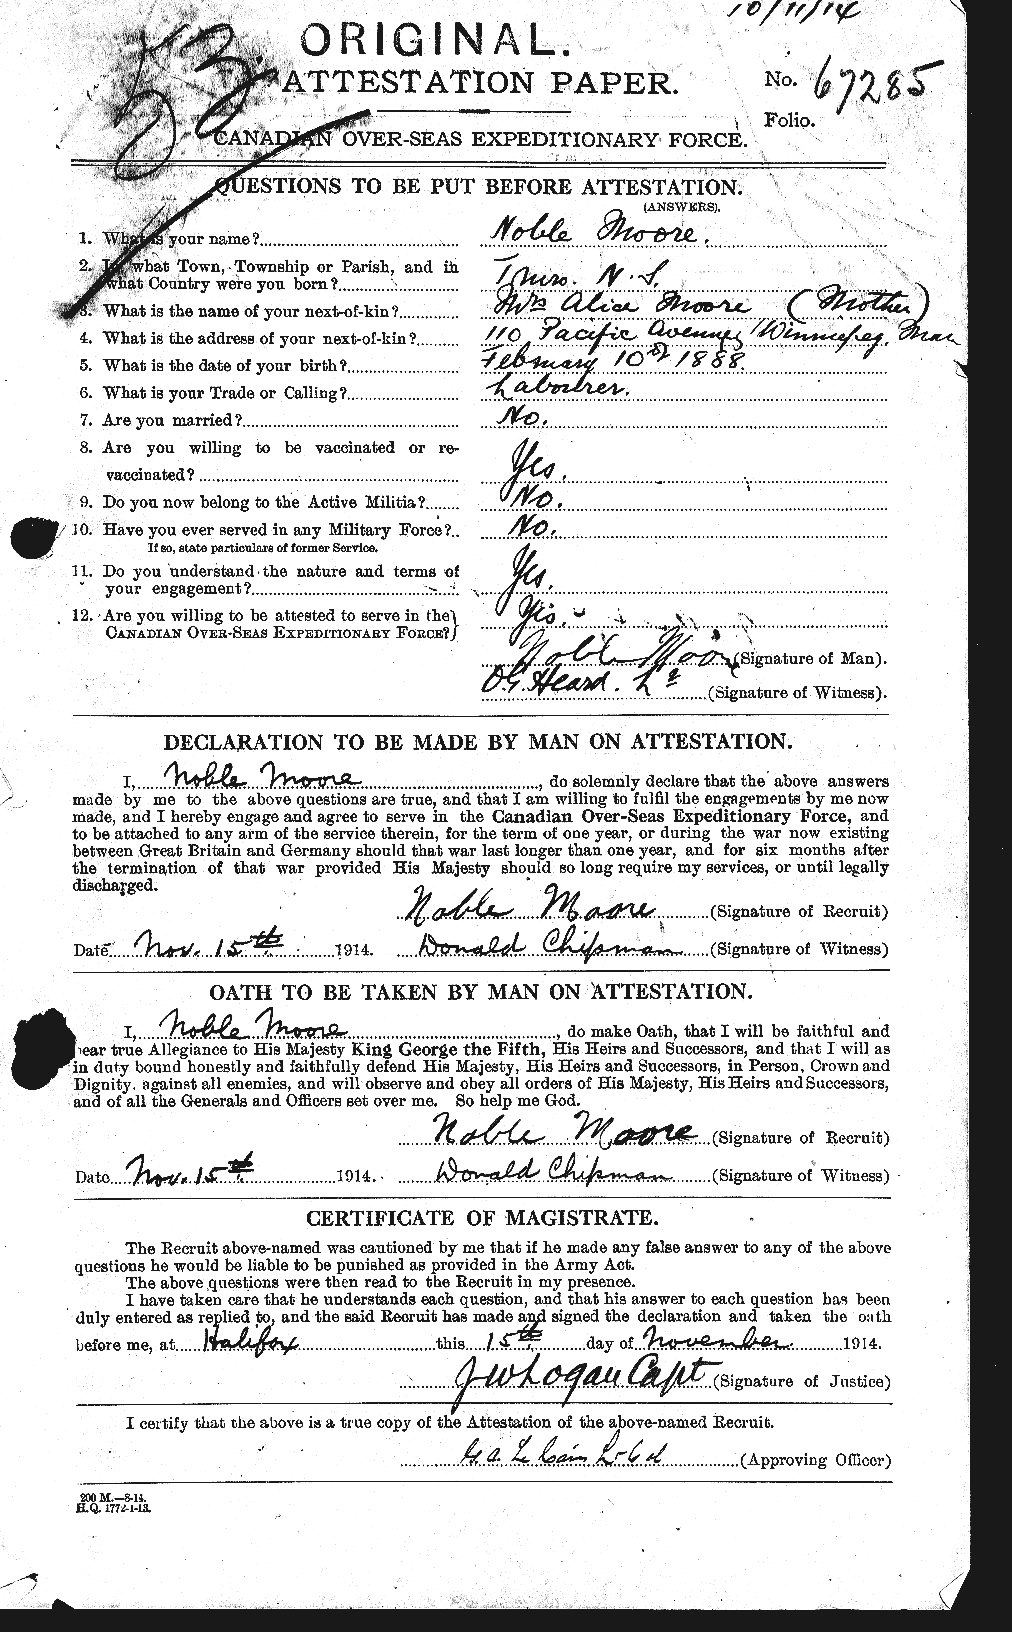 Personnel Records of the First World War - CEF 503456a